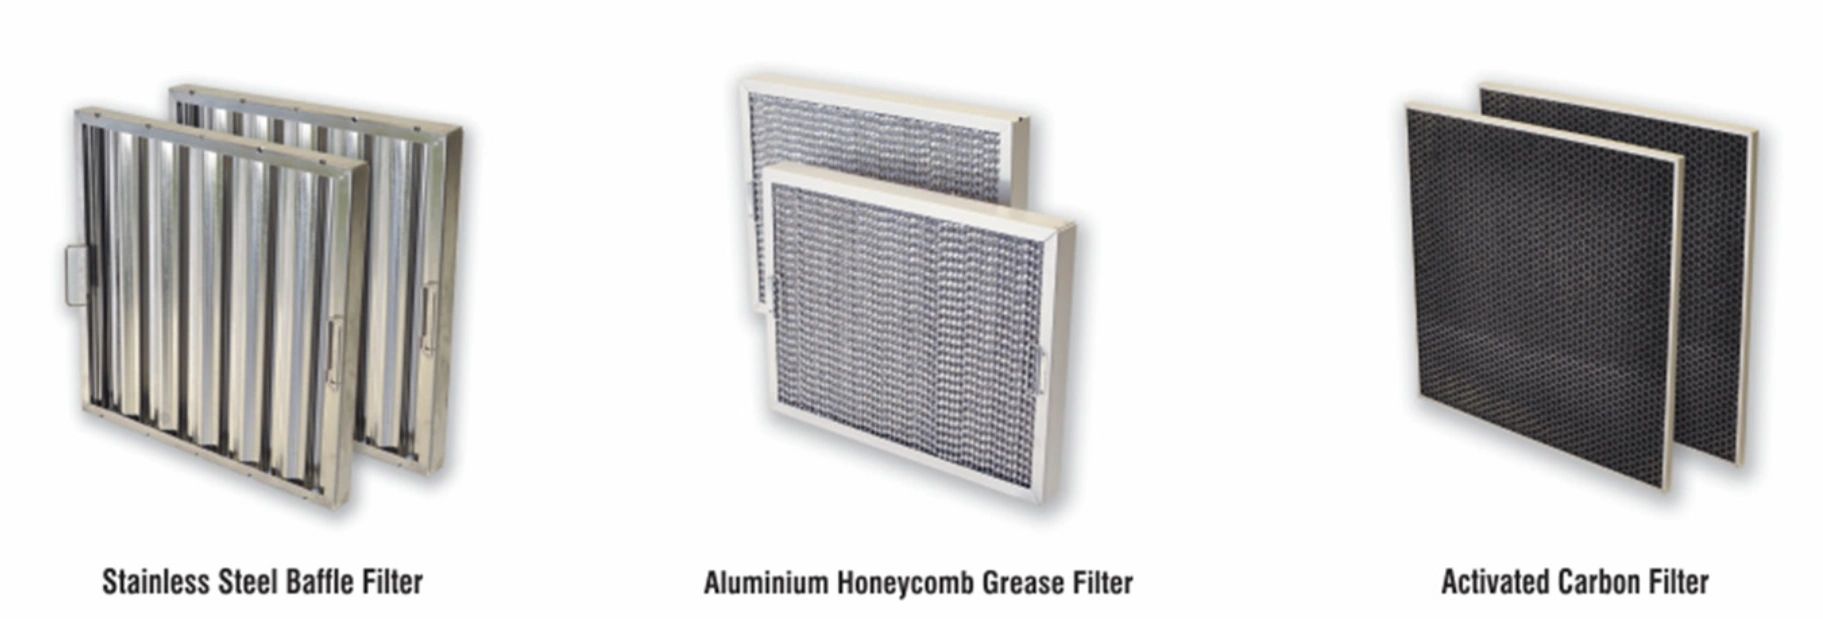 Kitchen filters cleaner & sales